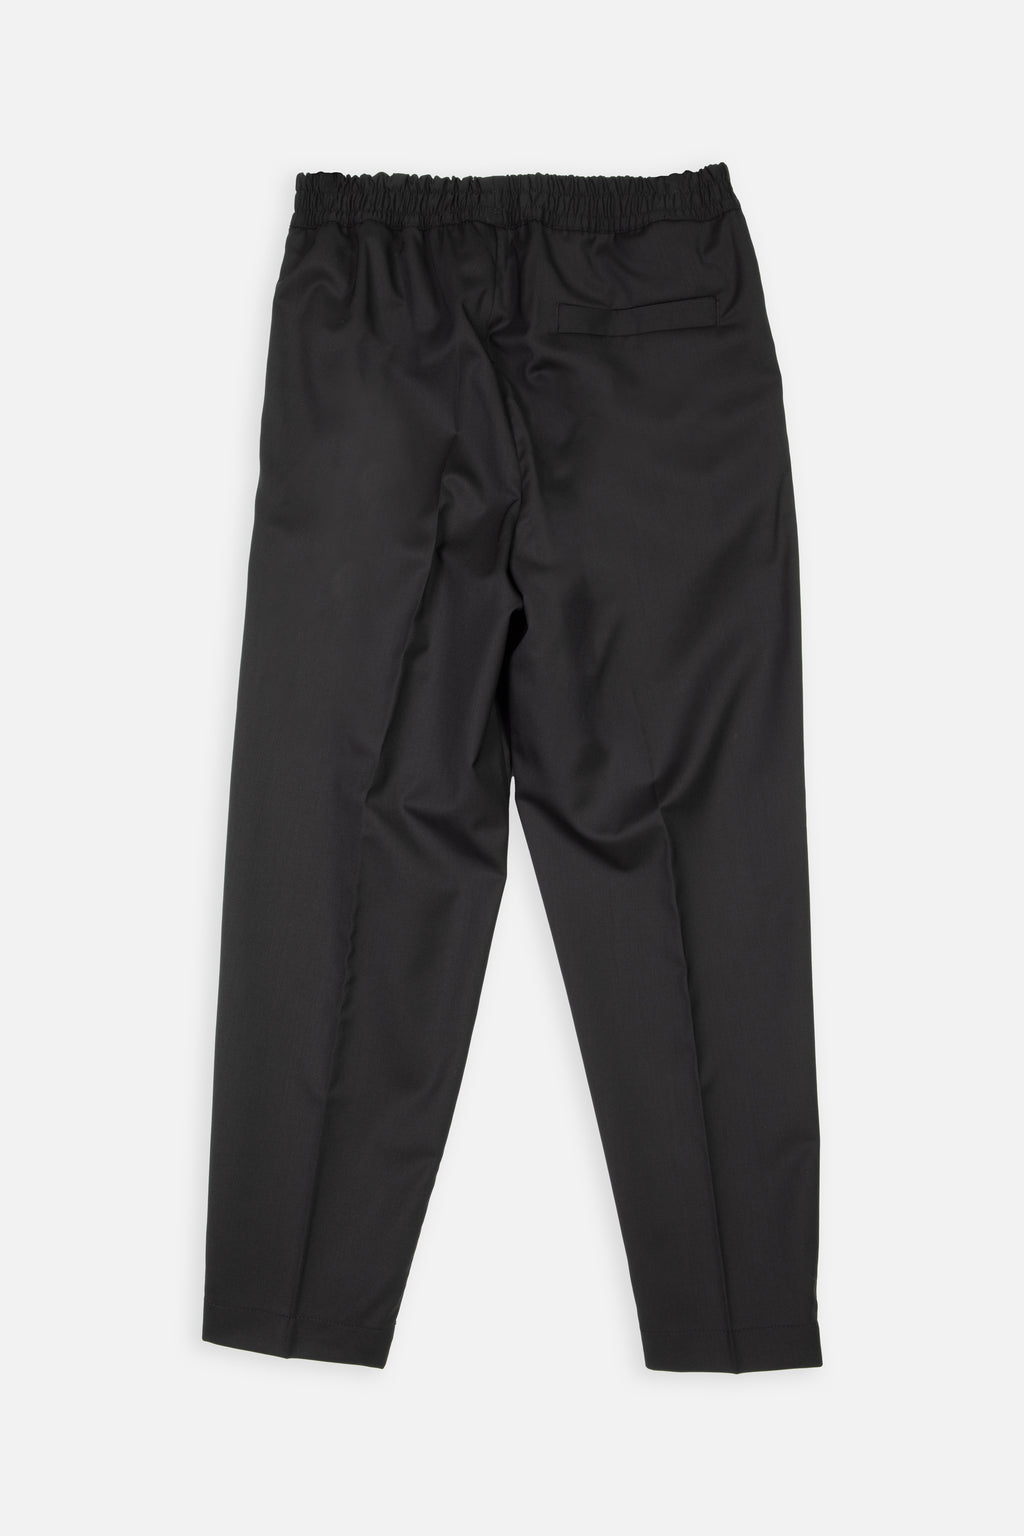 alt-image__Black-wool-tailored-pant-with-elastic-waistband---Savoys